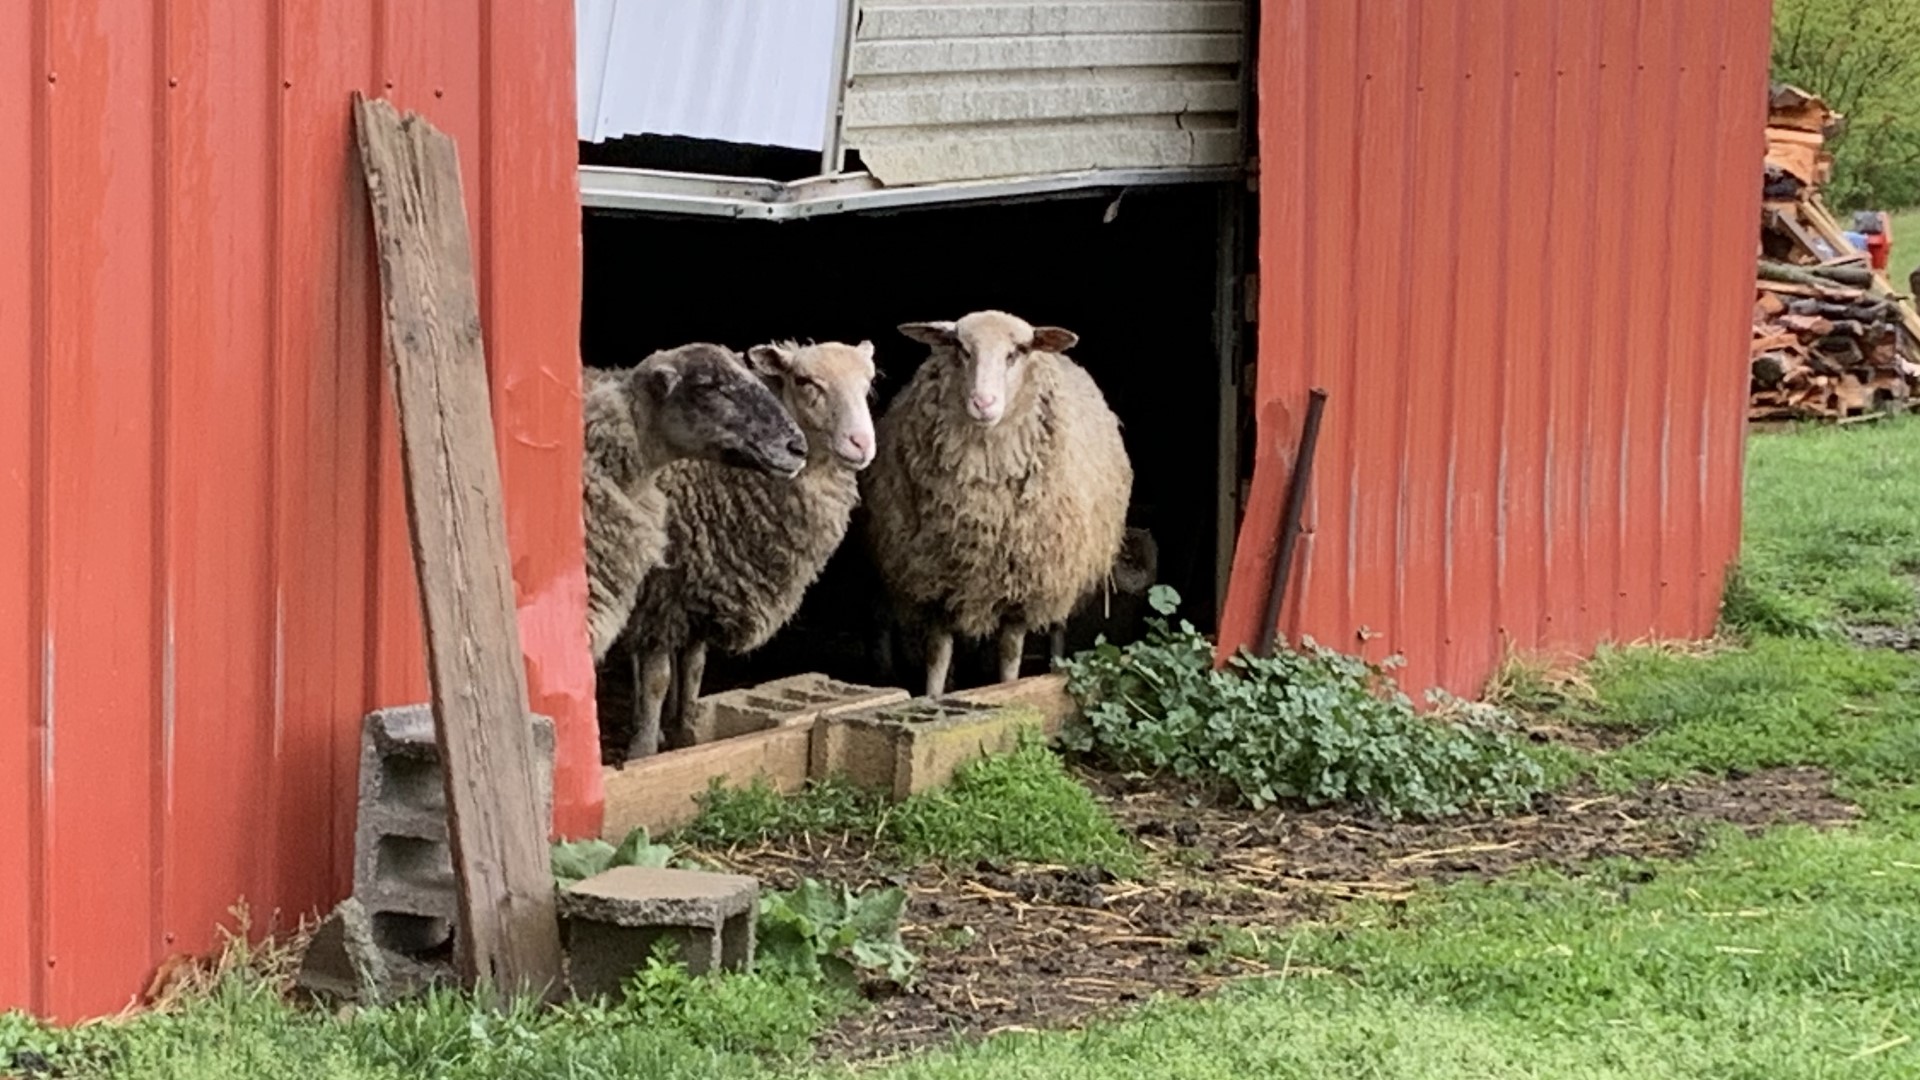 Jay Kendig, 90, says two lambs and a pregnant ewe were stolen within a span of a few weeks.